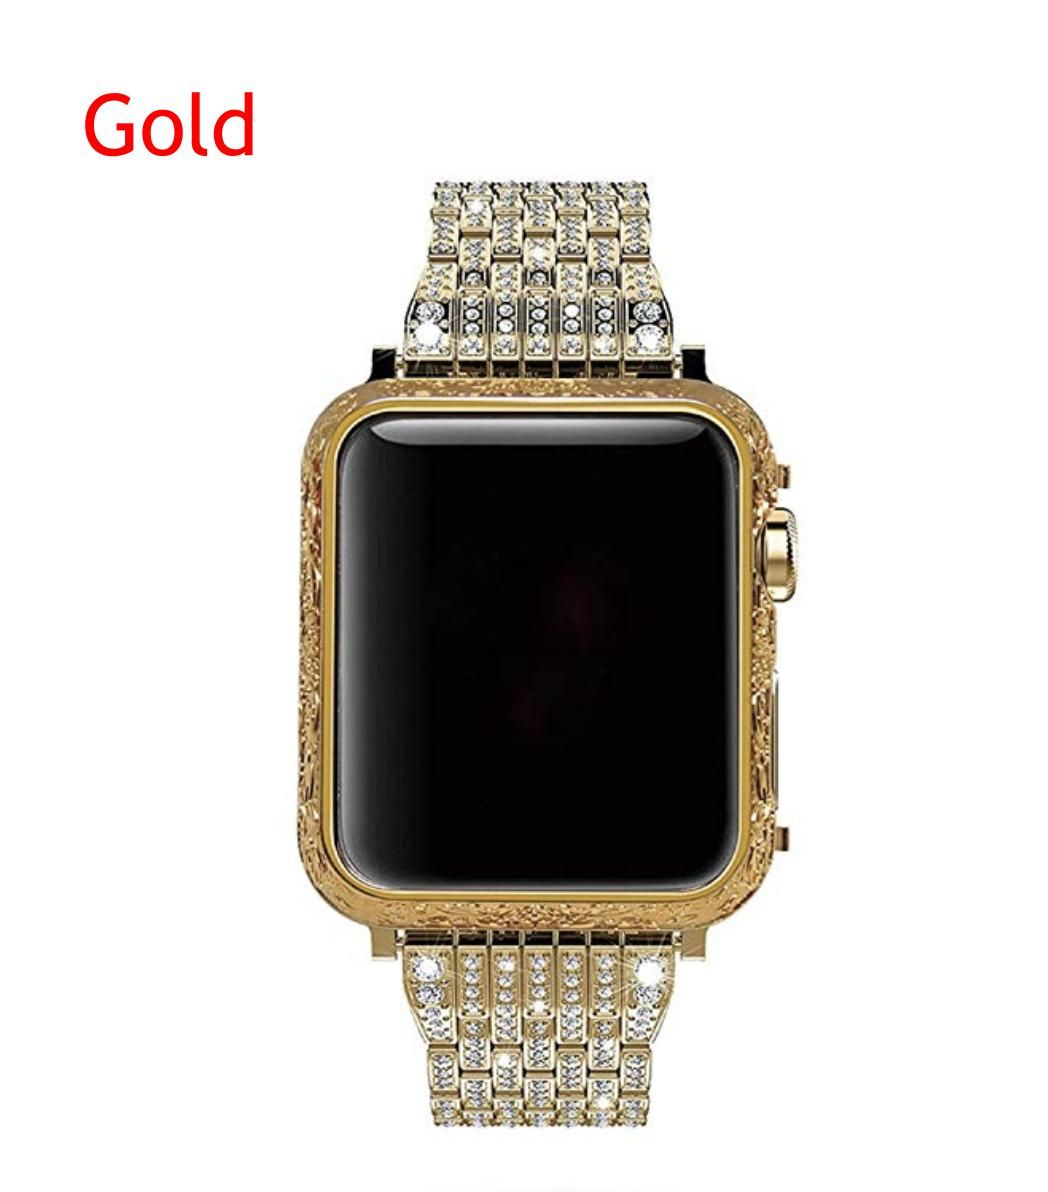 Gold (42mm)